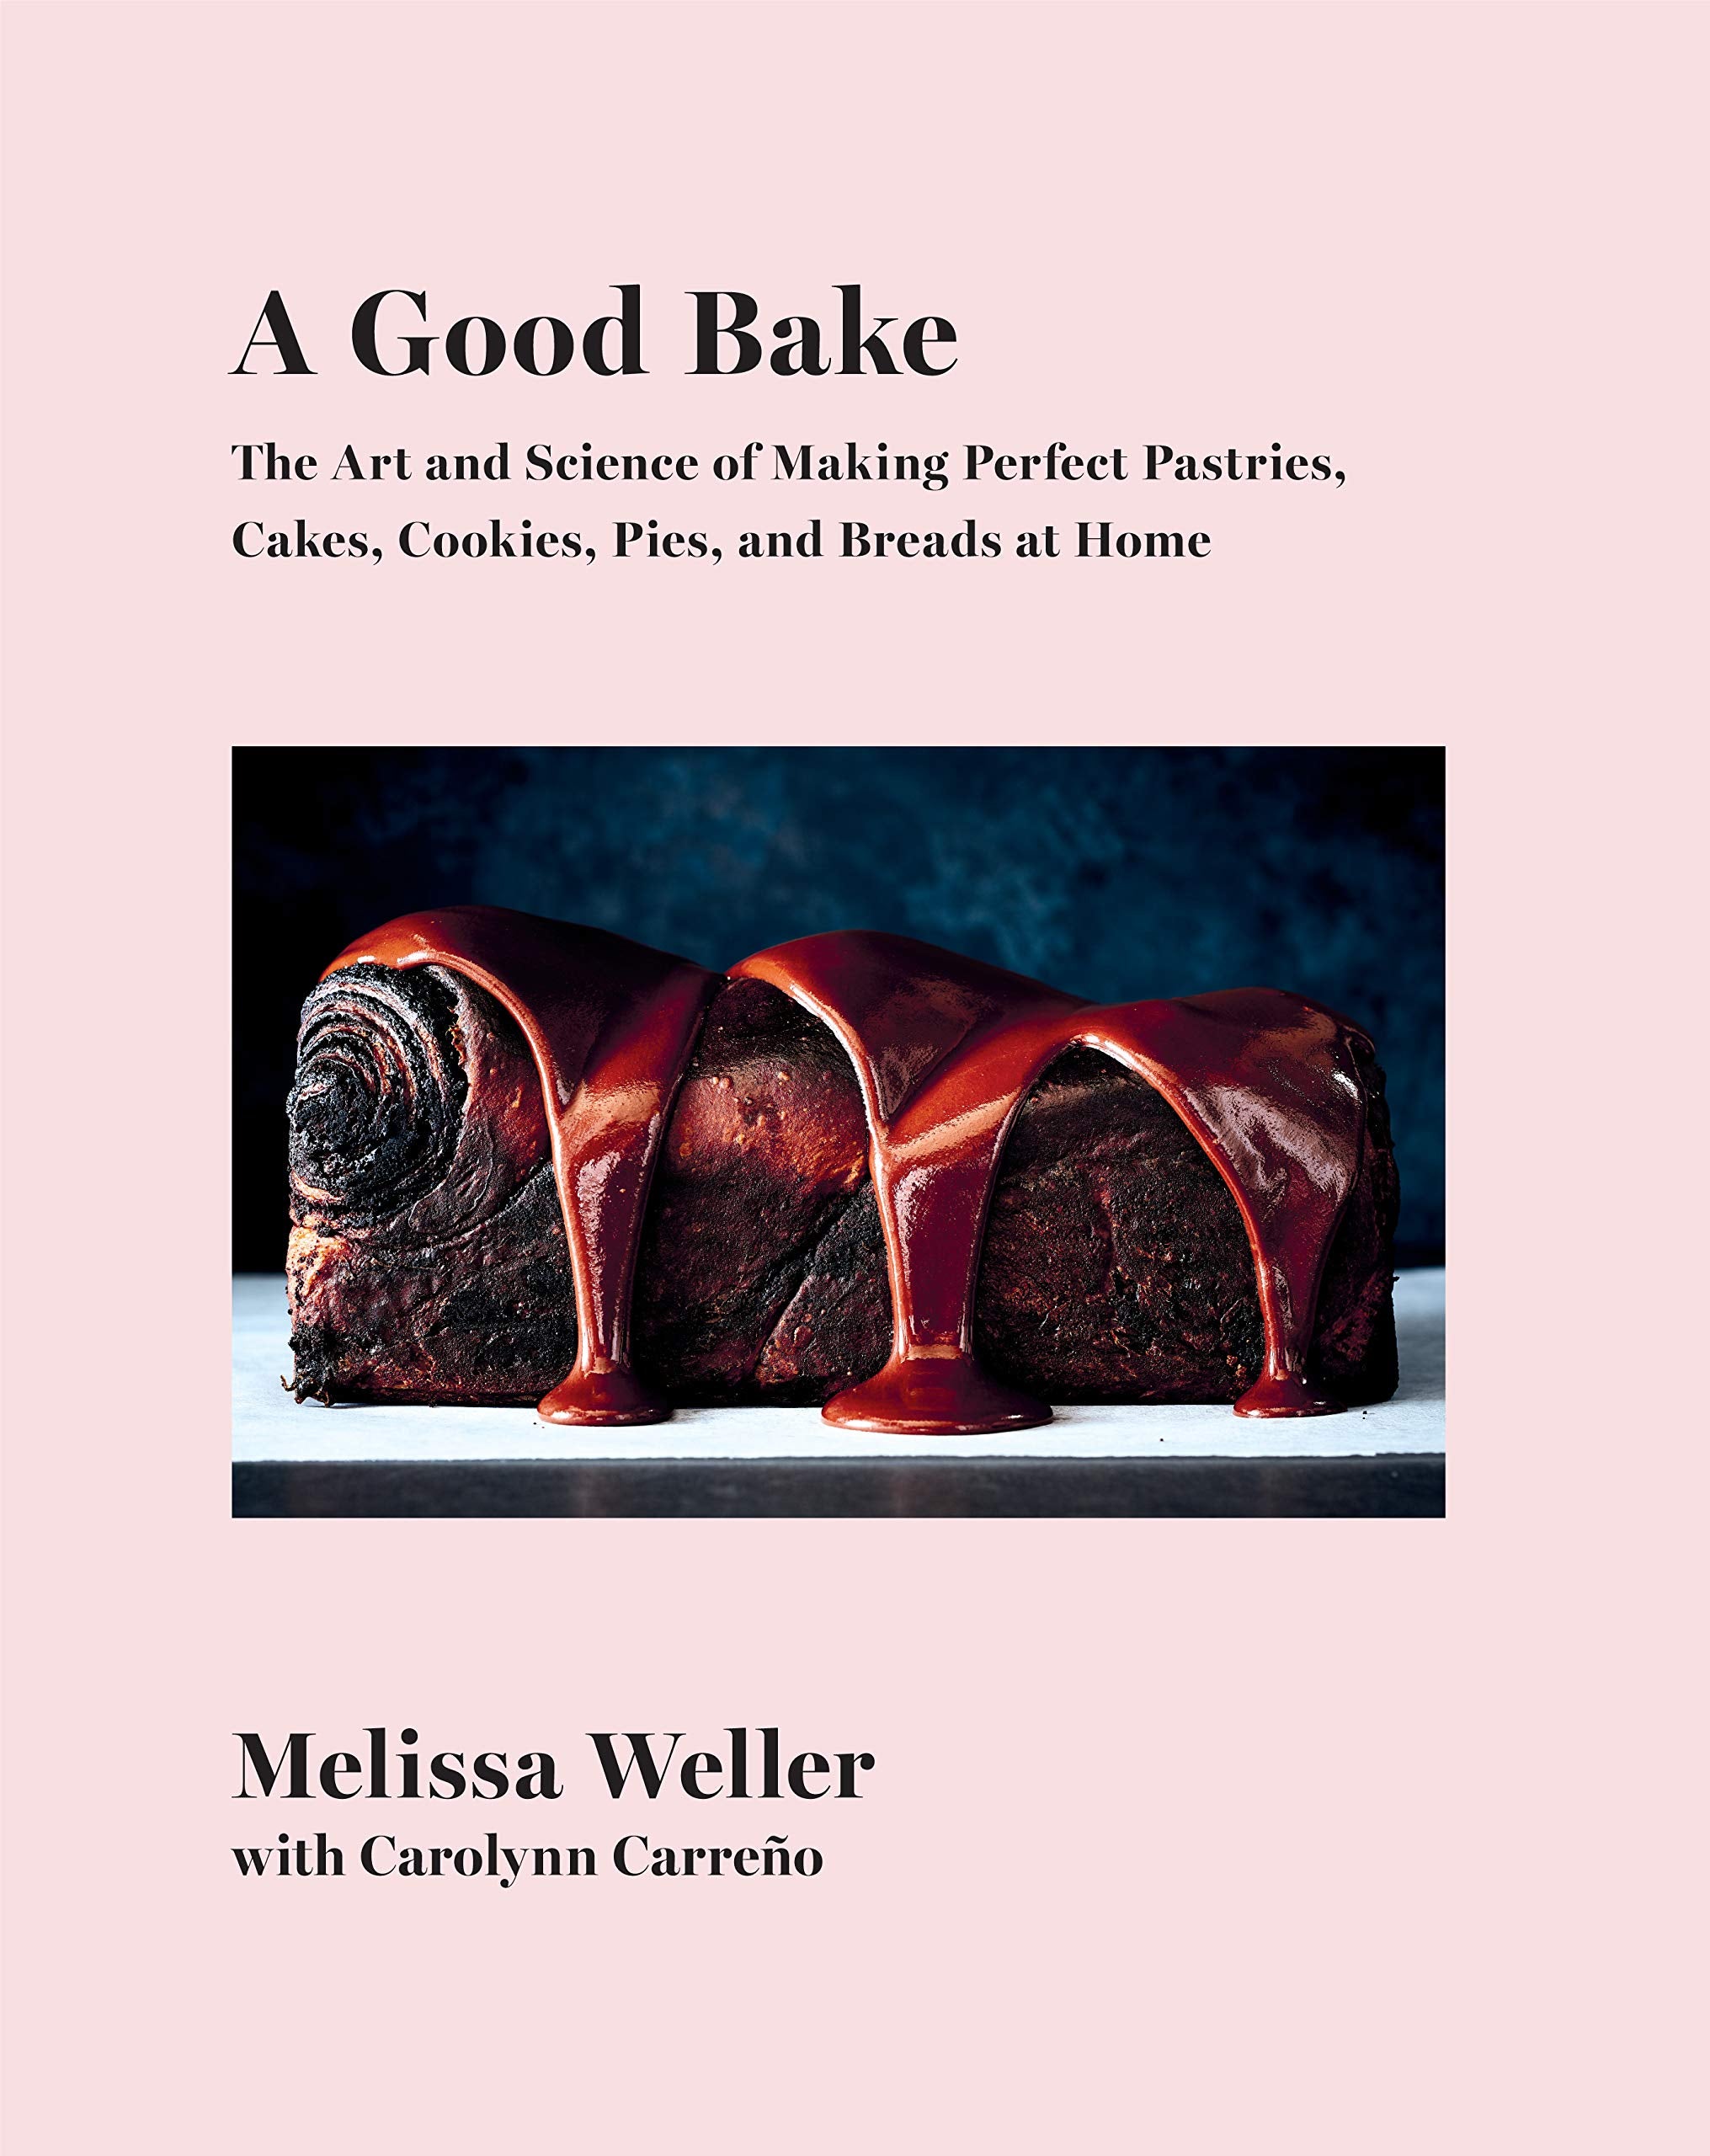 A Good Bake: The Art and Science of Making Perfect Pastries, Cakes, Cookies, Pies, and Breads at Home (Melissa Weller, Carolynn Carreno)